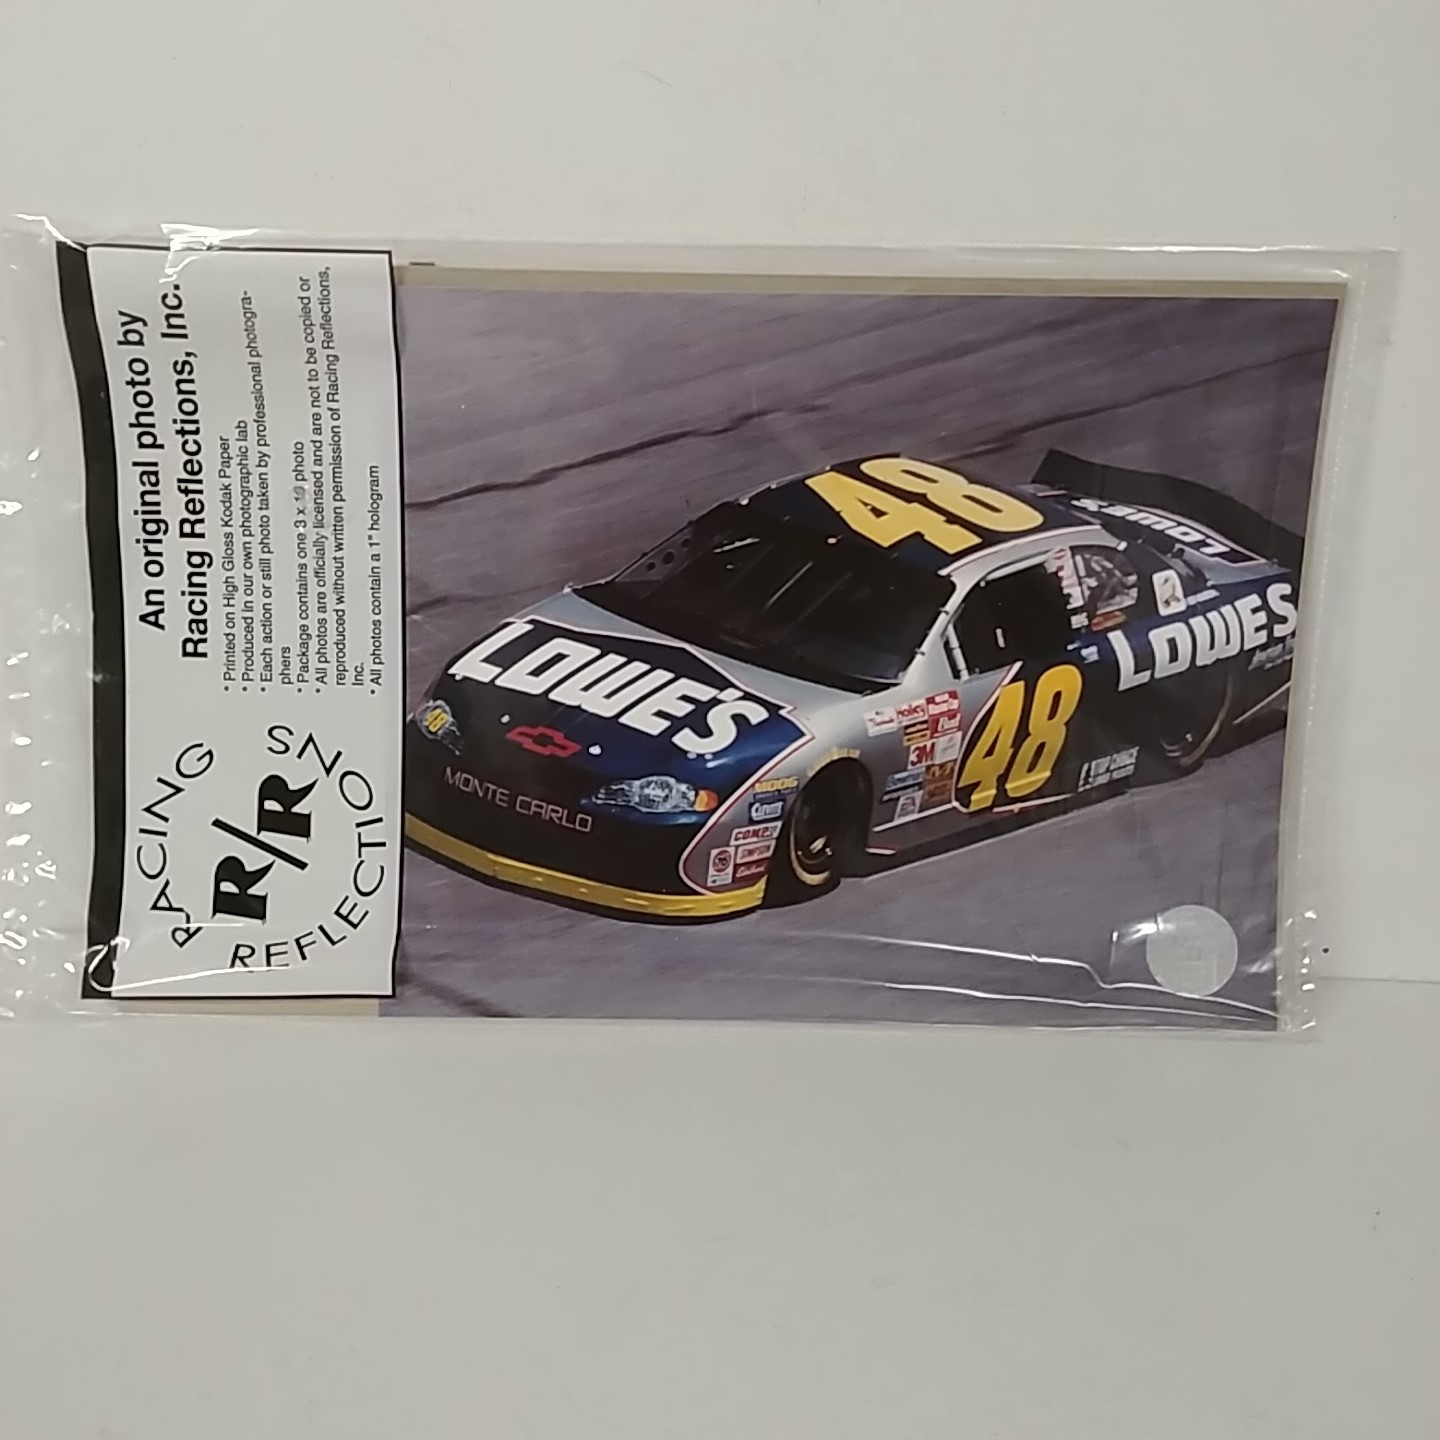 2002 Jimmie Johnson Lowe's "On Track" Racing Reflections Photo